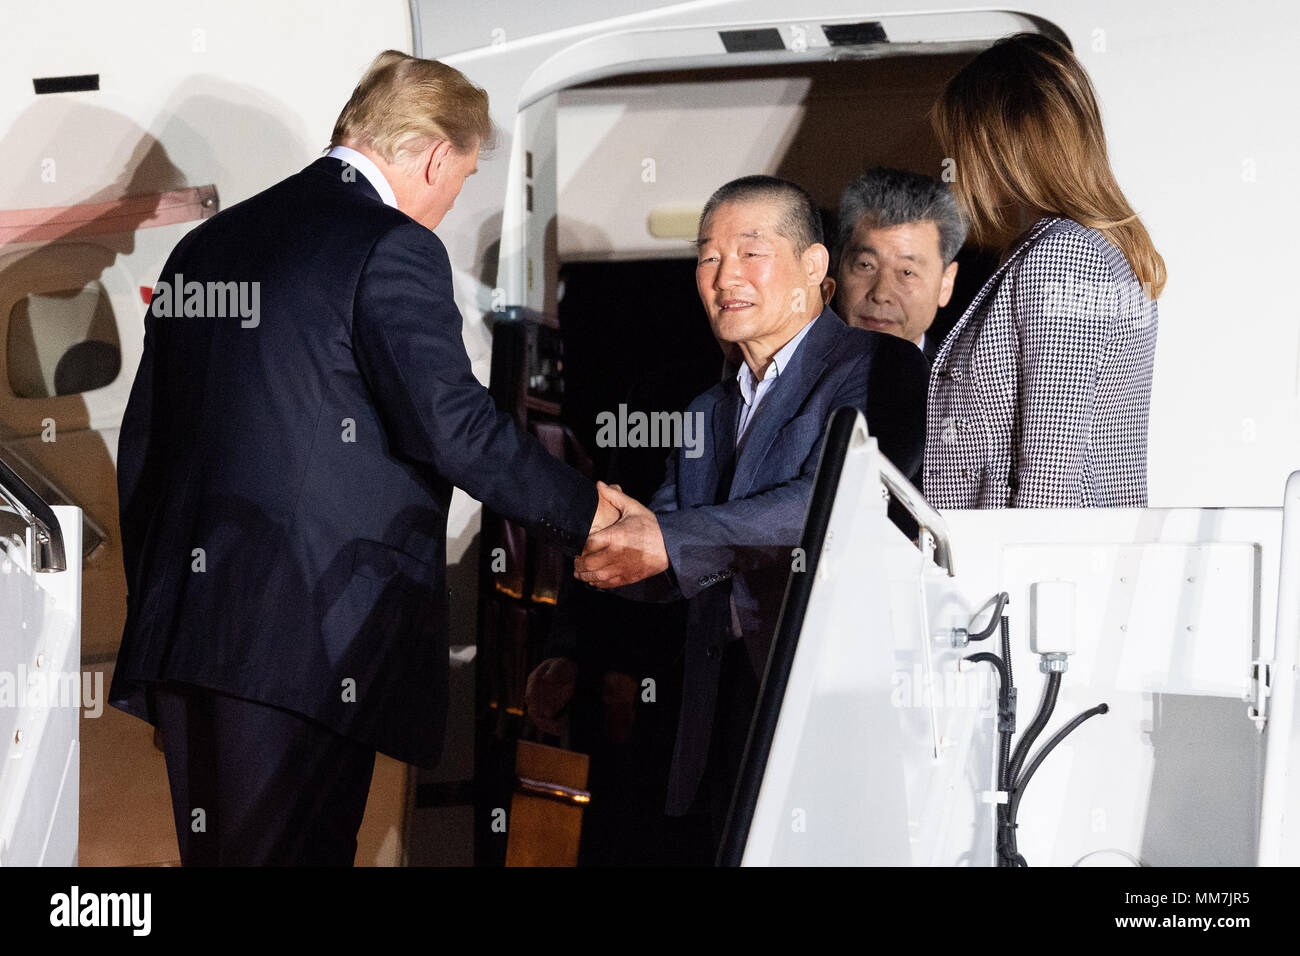 President Donald Trump and his wife Melania welcoming the three American detainees (Kim Dong-chul, Kim Hak-song, and Tony Kim) held in captivity in North Korea at Joint Base Andrews in Suitland. Stock Photo